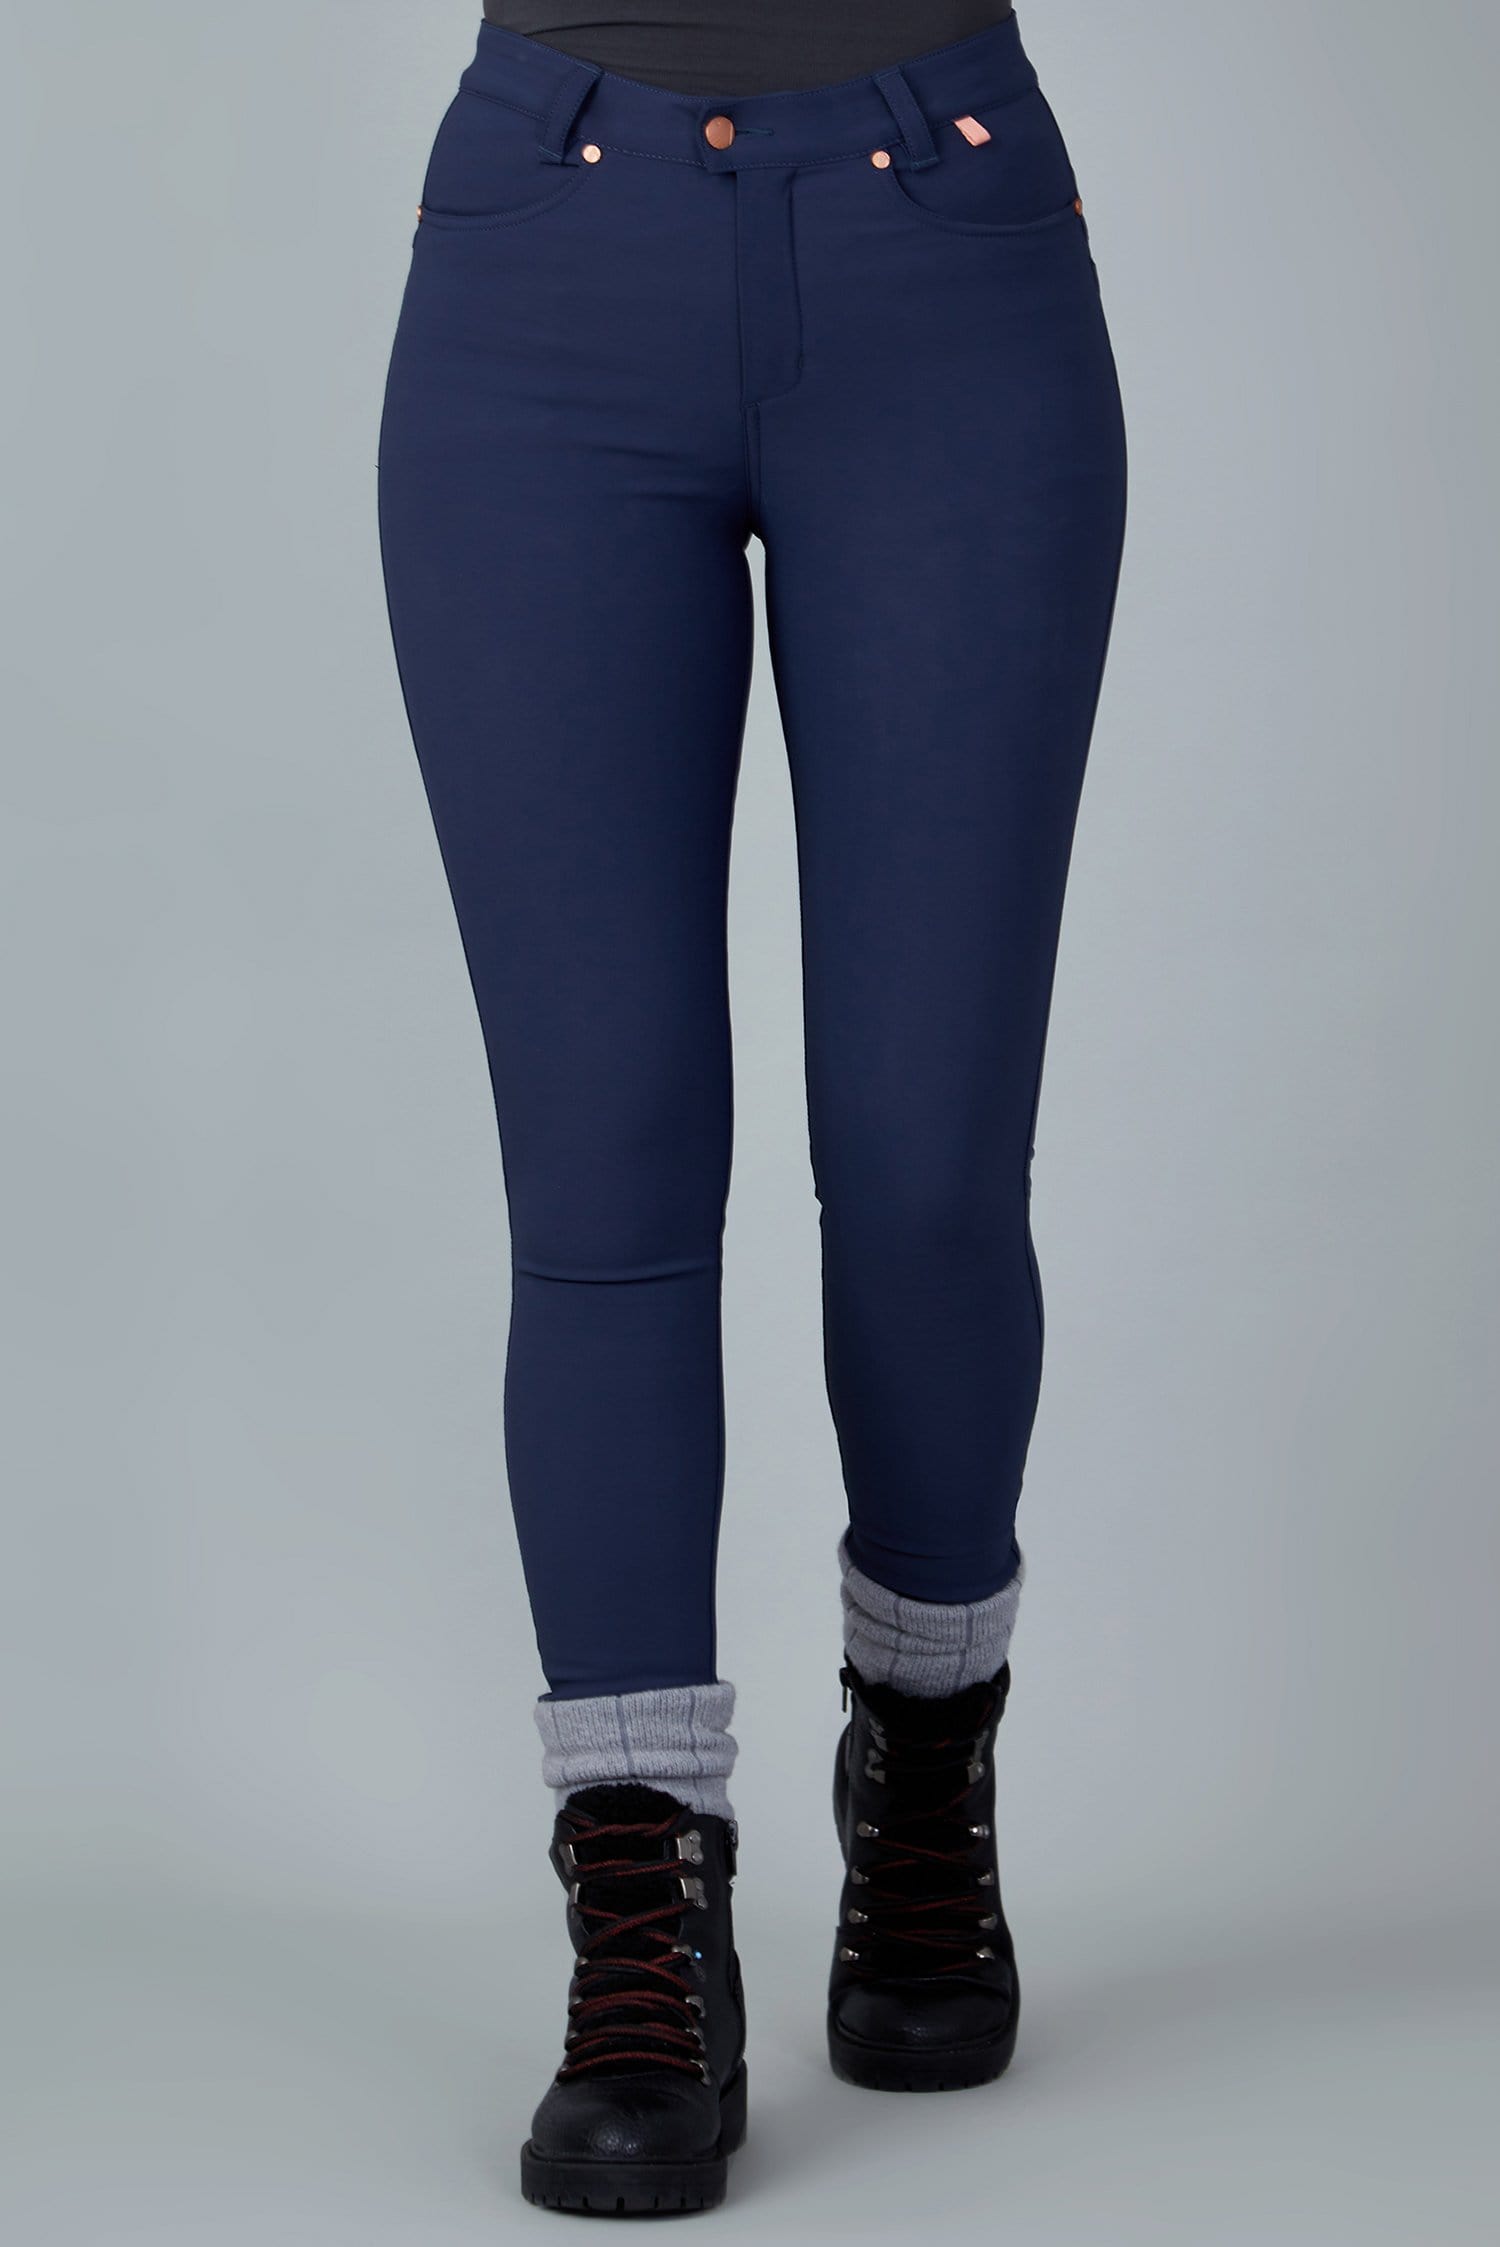 The Aventurite Stretch Skinny Outdoor Trousers - Midnight Blue - 28r / Uk10 - Womens - Acai Outdoorwear